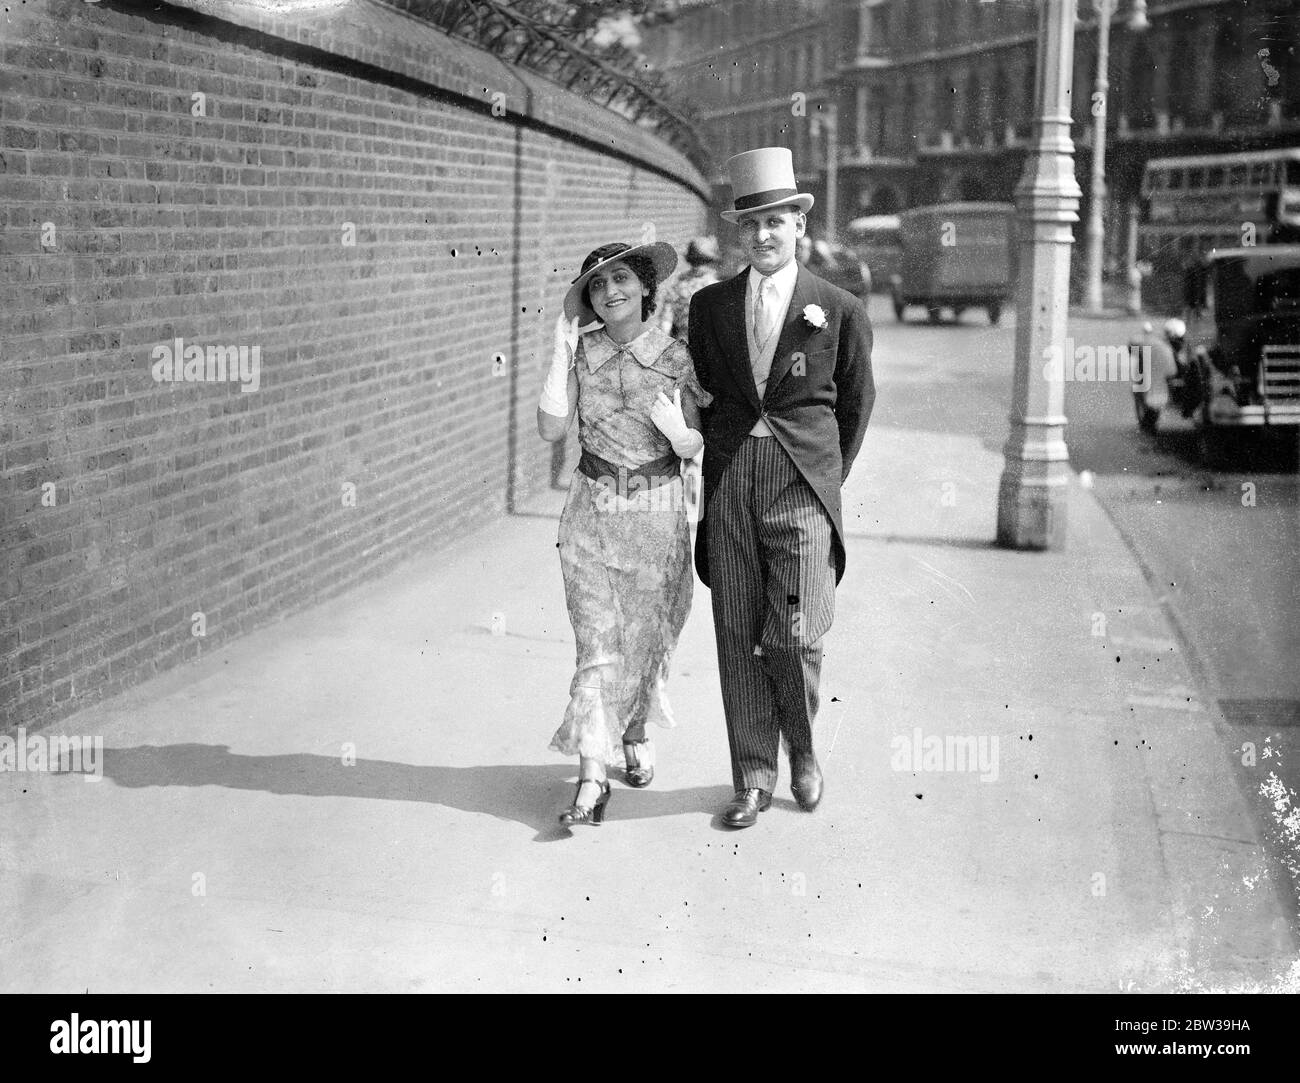 American woman lawyer at Royal Garden Party at Buckingham Palace . Miss Fanny Holtzman , the famous American woman lawyer , arriving with her brother , Mr David Marshall Holtzman , for the Garden Party . 25 July 1935 Stock Photo